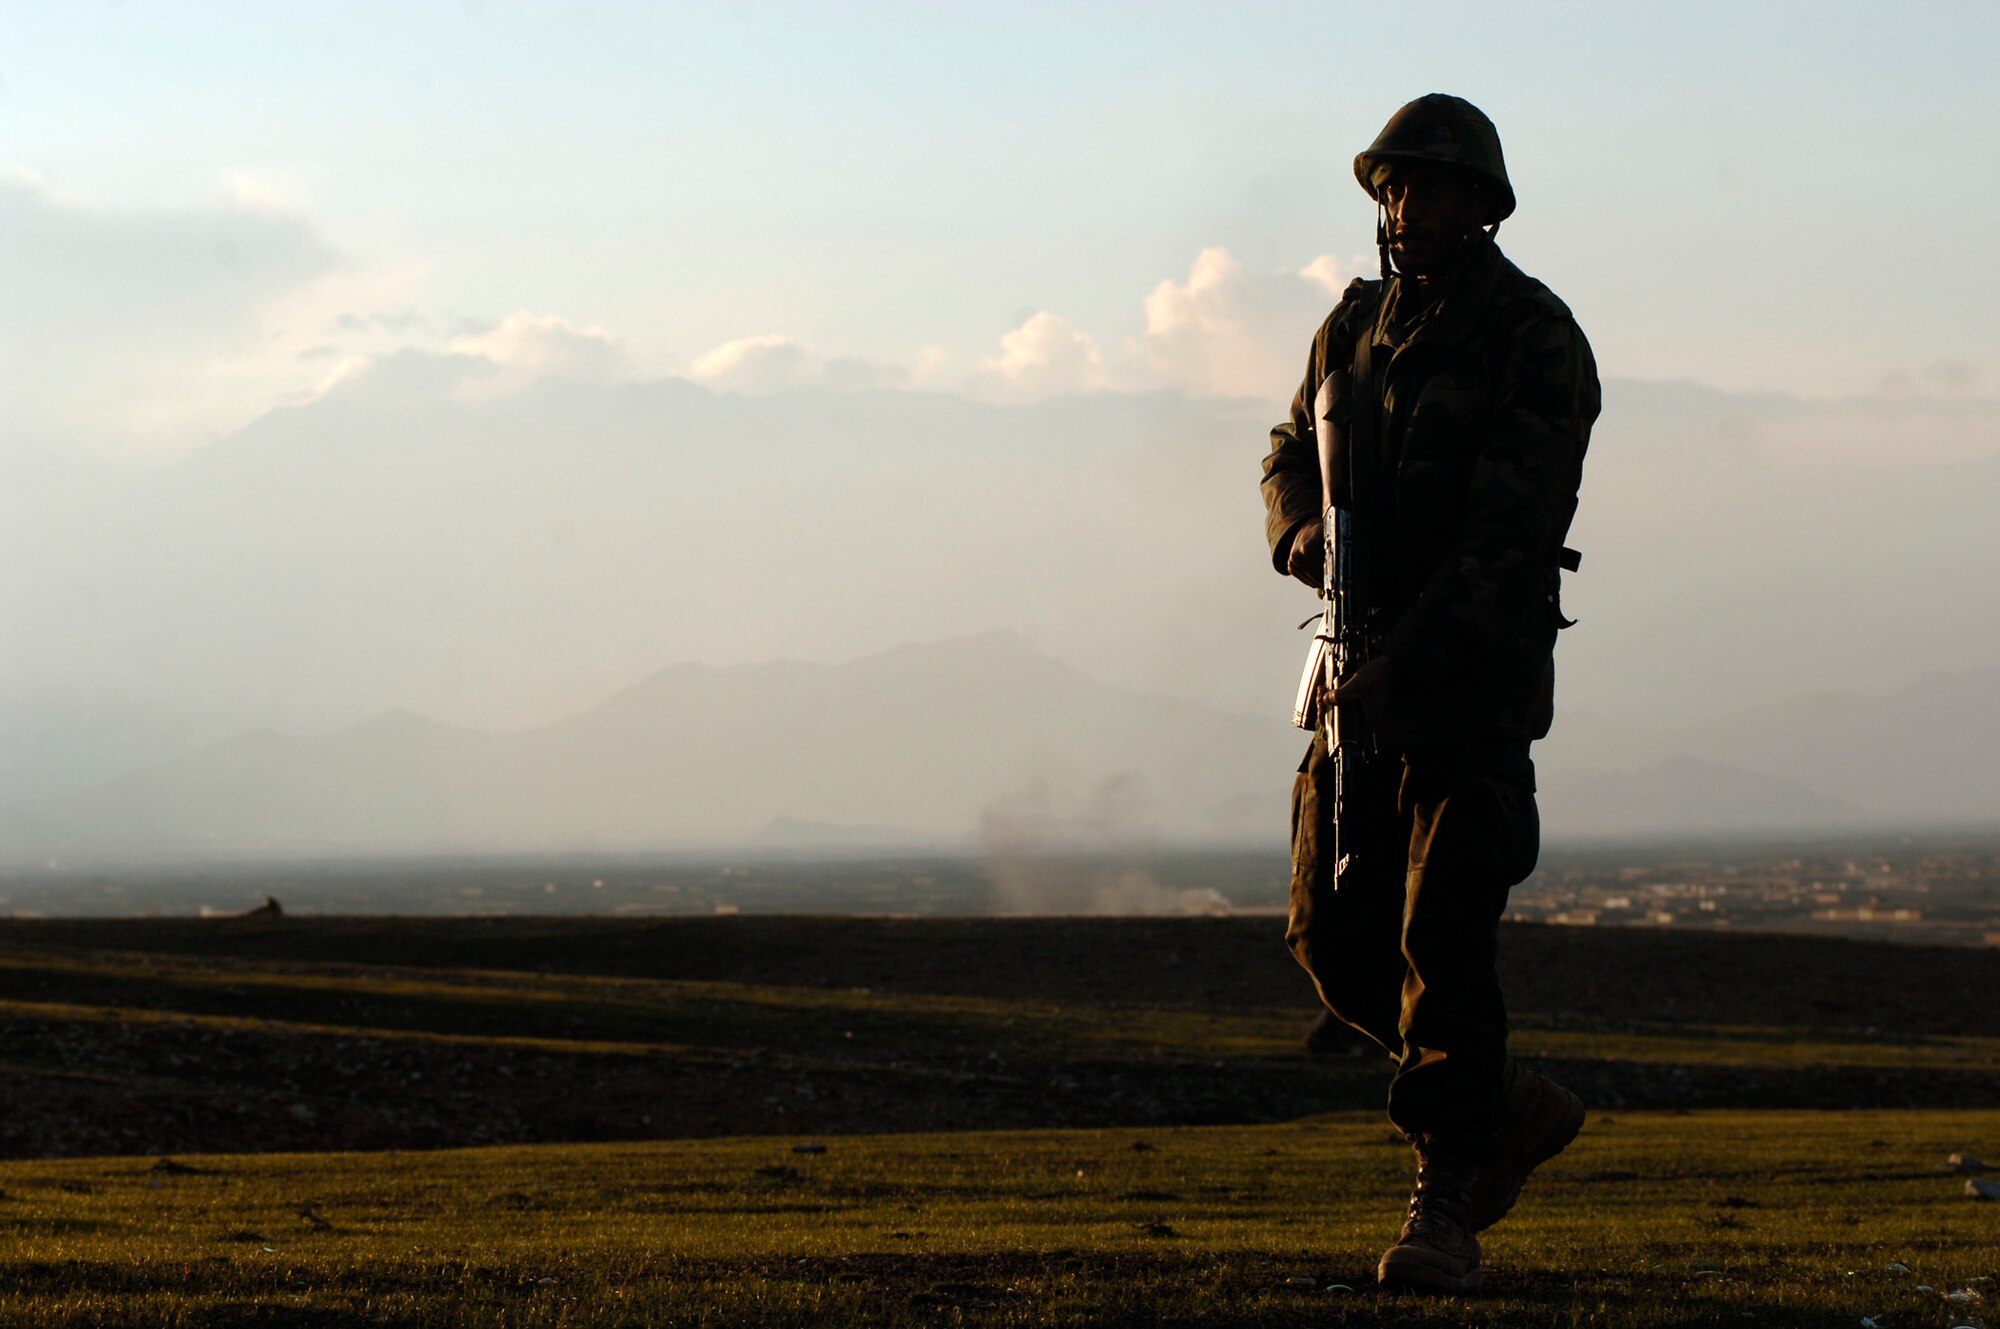 An Afghan National Army trainee provides perimeter security during training at the Kabul Military Training Center, or KMTC.   Approximately 19 U.S. Air Force members provide guidance and mentorship for the instructors, officers and trainees at KMTC.  The ISAF and U.S. military  provide the maximum amount of guidance for the Afghan National Army to independently sustain the security of its own country.  (U.S. Air Force photo/Tech. Sgt. Cecilio M. Ricardo Jr.) 